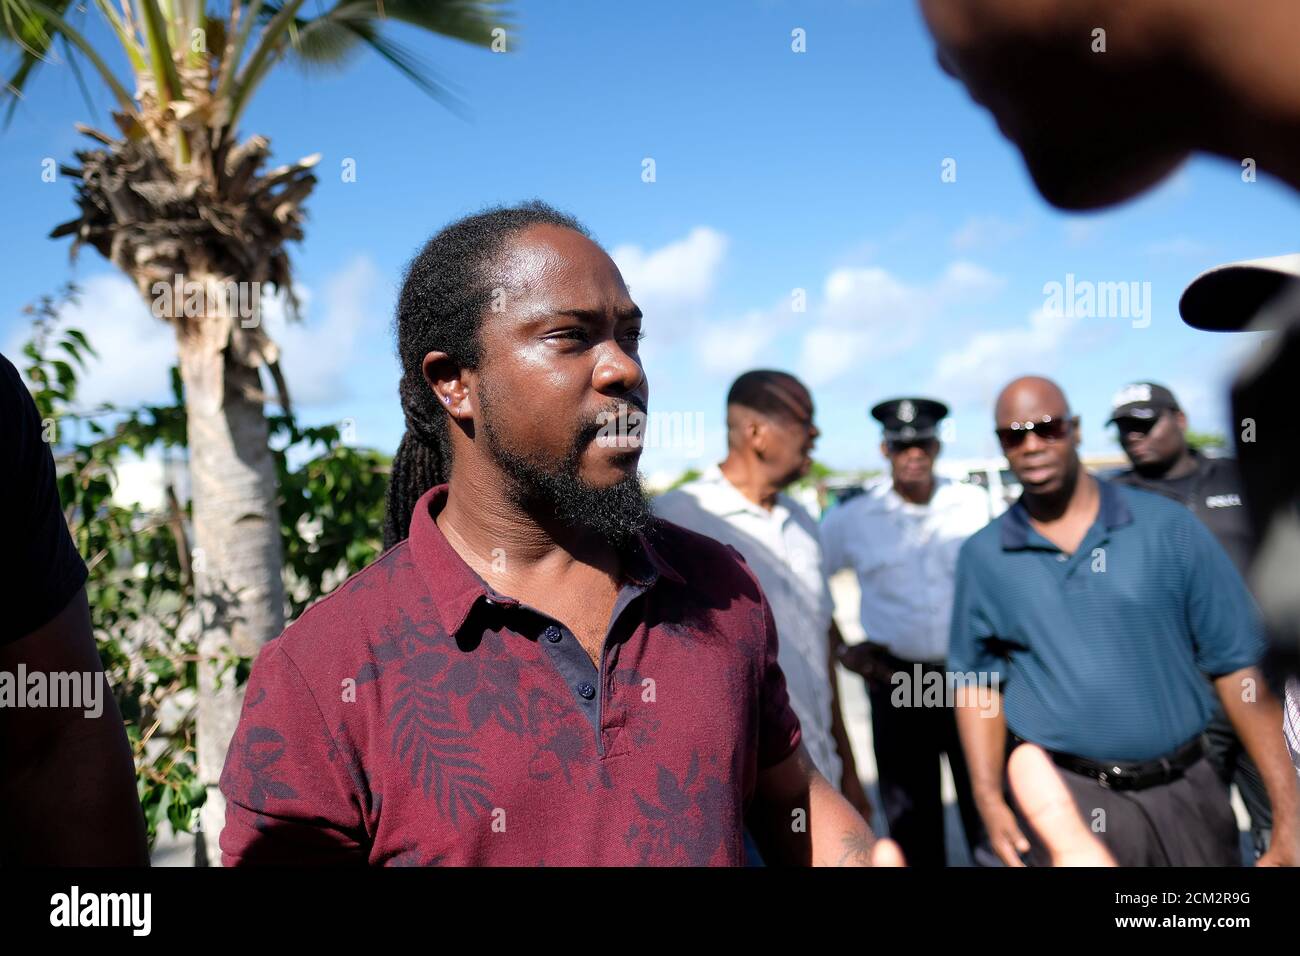 REFILE - CORRECTING TYPO  Marshall Mitchel, the half-brother of victim Kenny Mitchel, speaks to the press after the hearing of Gavin 'Scott' Hapgood, a UBS financial advisor, who is accused of killing a hotel worker while on vacation in April 2019, in The Valley, Anguilla August 22, 2019. REUTERS/Ricardo Arduengo Stock Photo